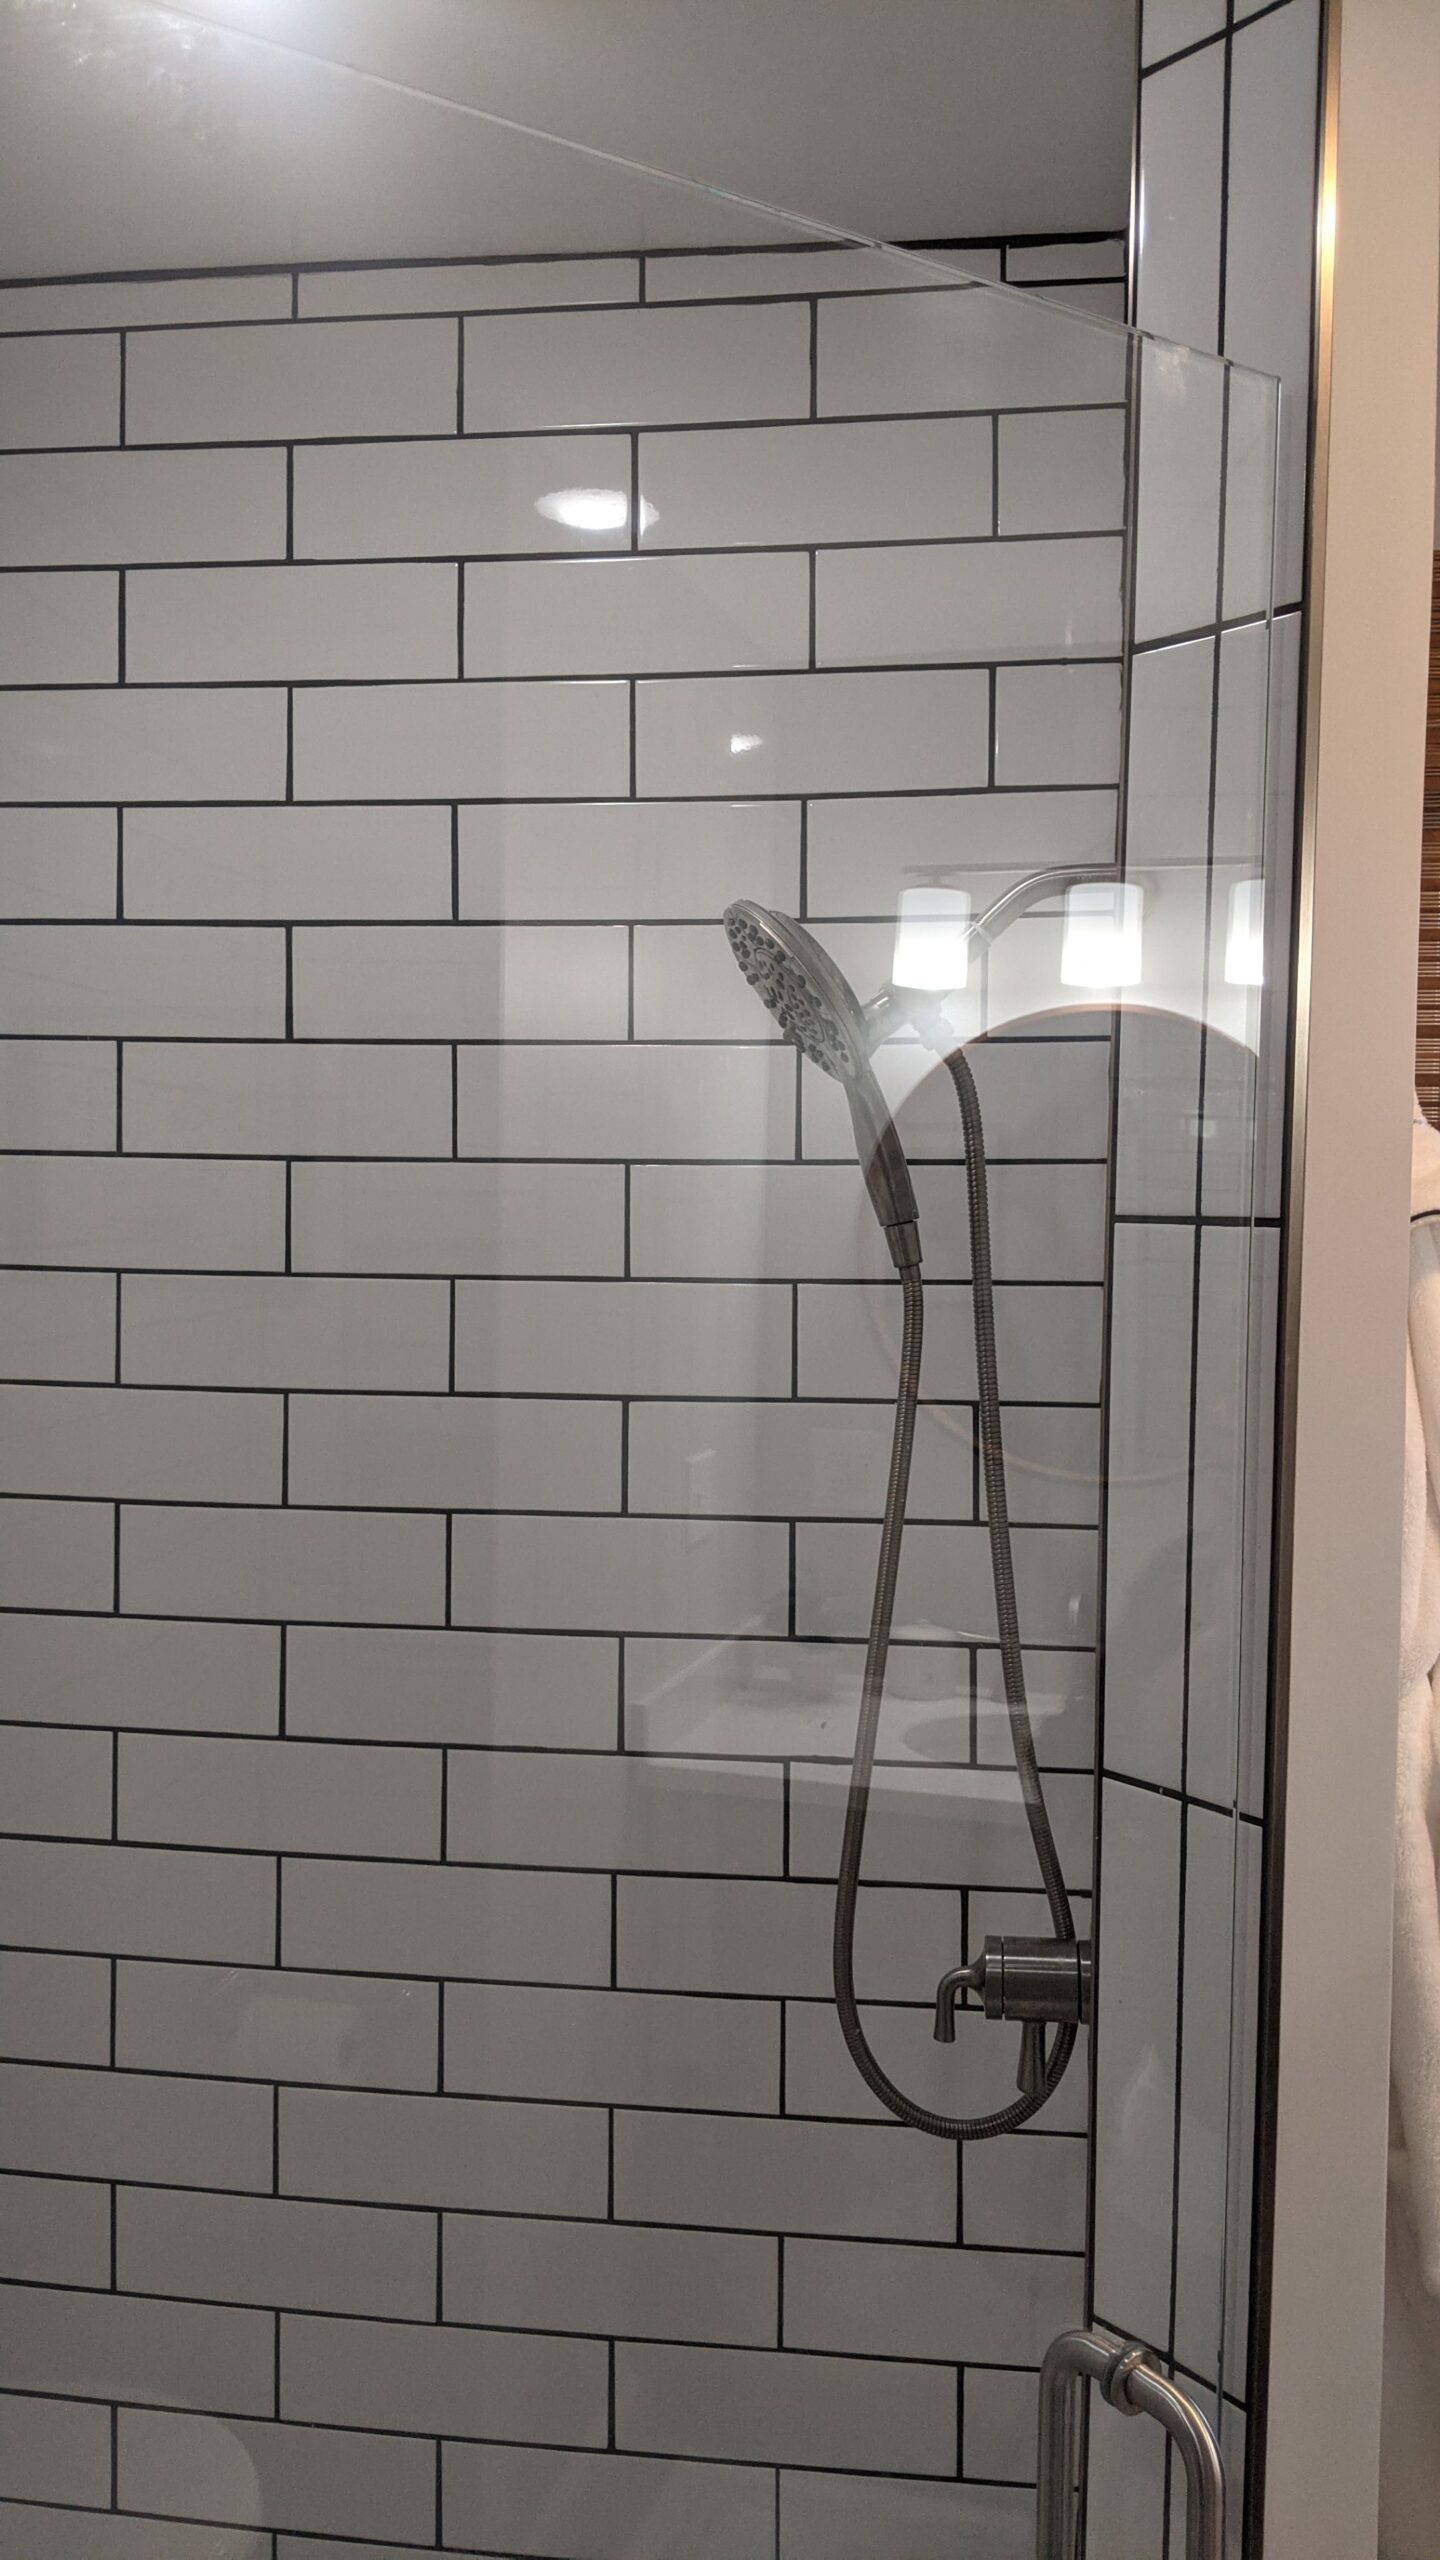 Picture of the modern subway tile shower.